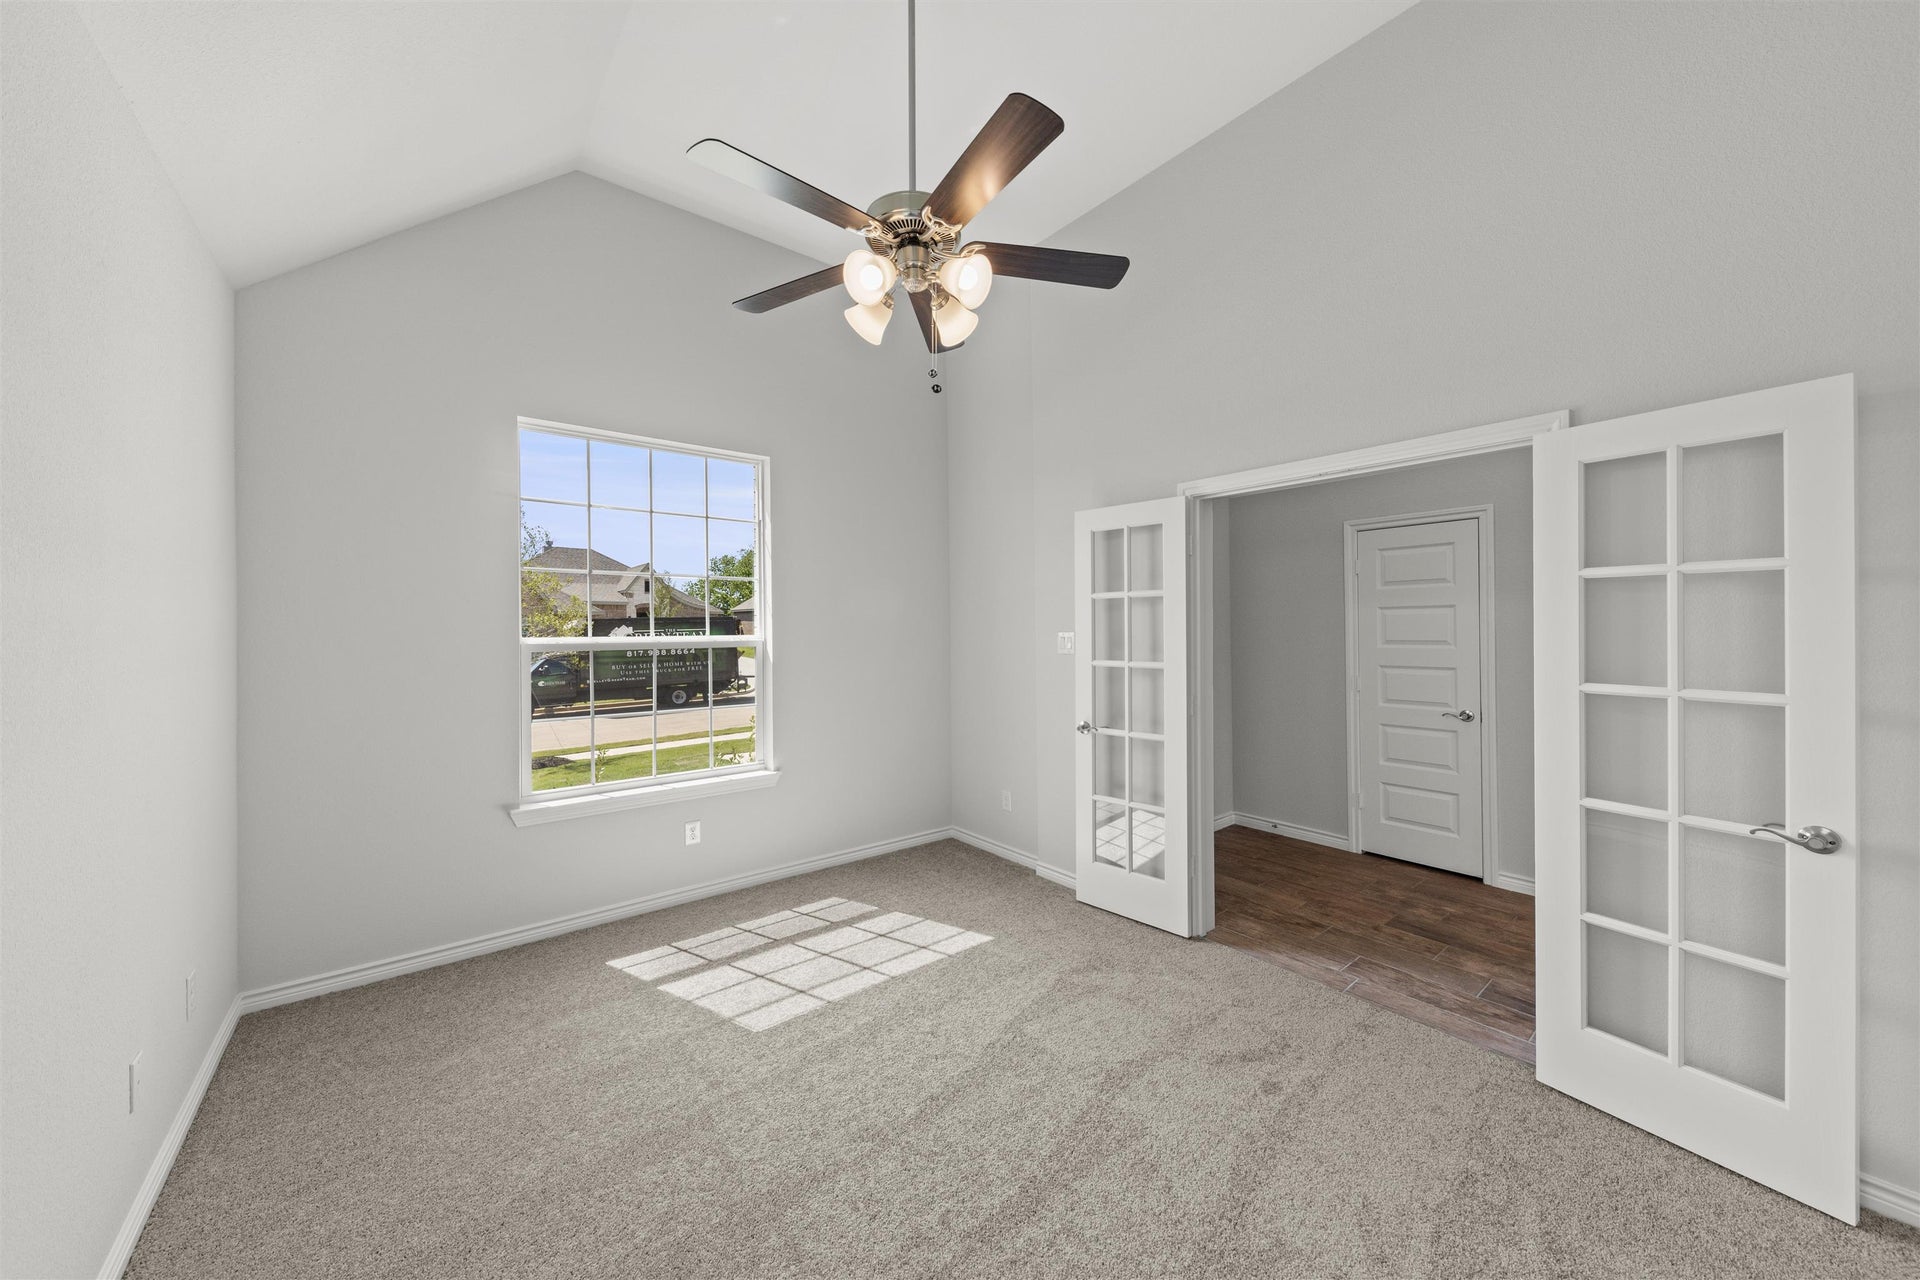 3br New Home in Joshua, TX